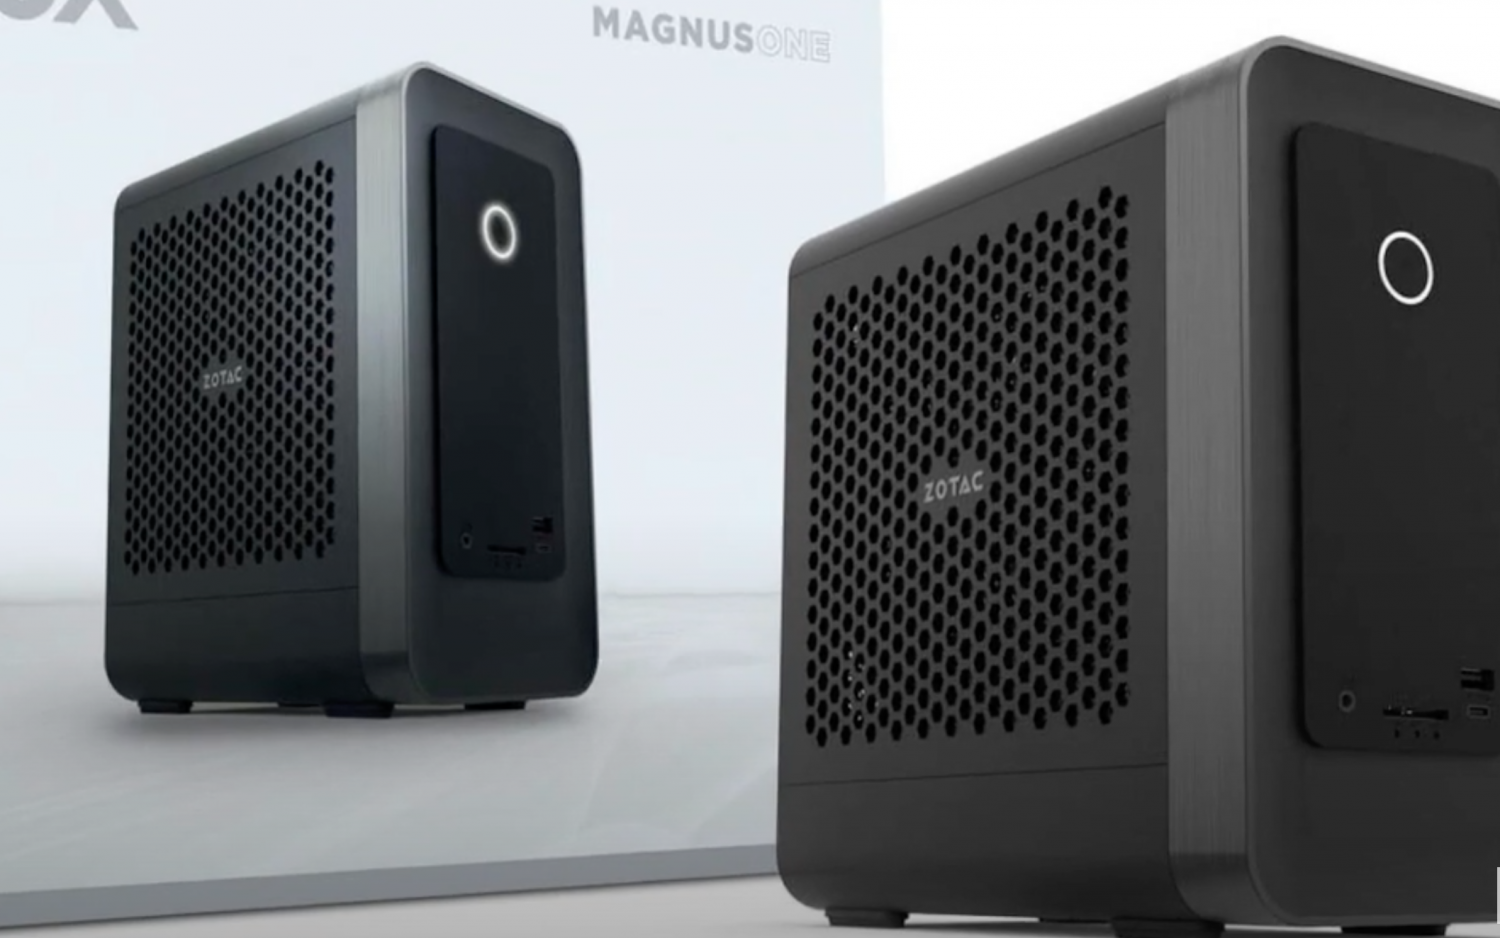  Zotac Unveils Magnus One Mini PC with Intel Core i7-10700 and Nvidia GeForce RTX 30 Series Graphics